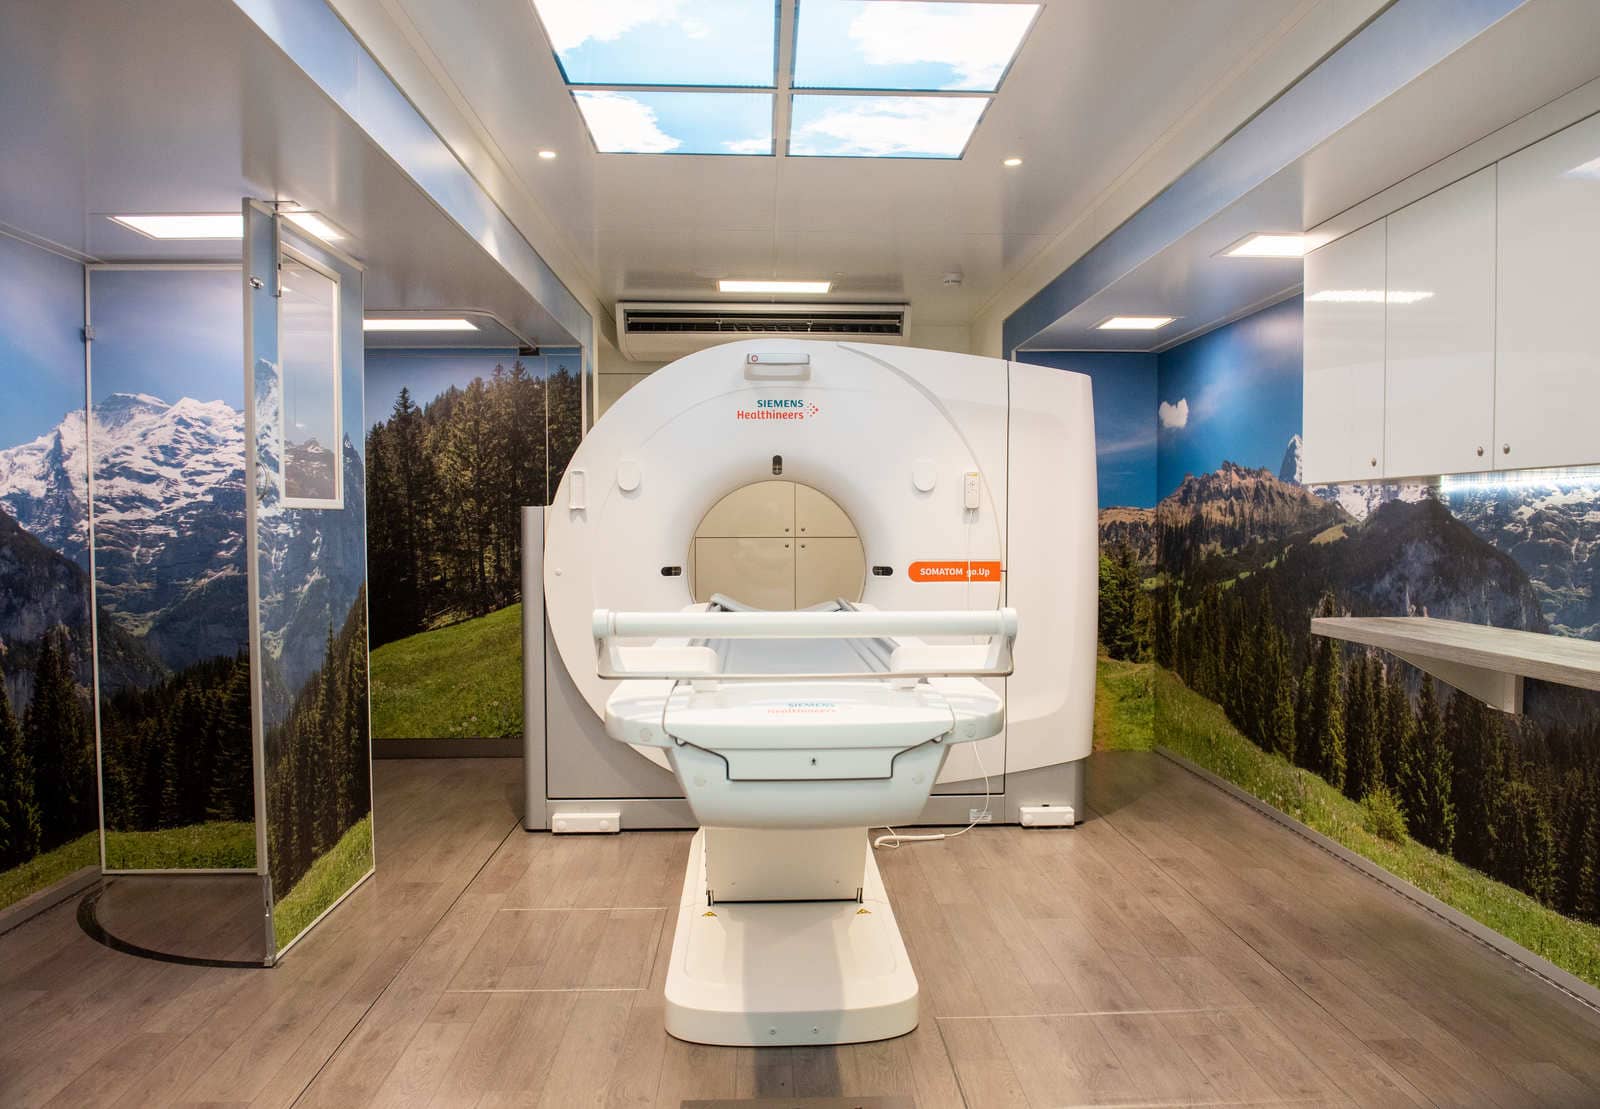 The ultra low dose CT scanner